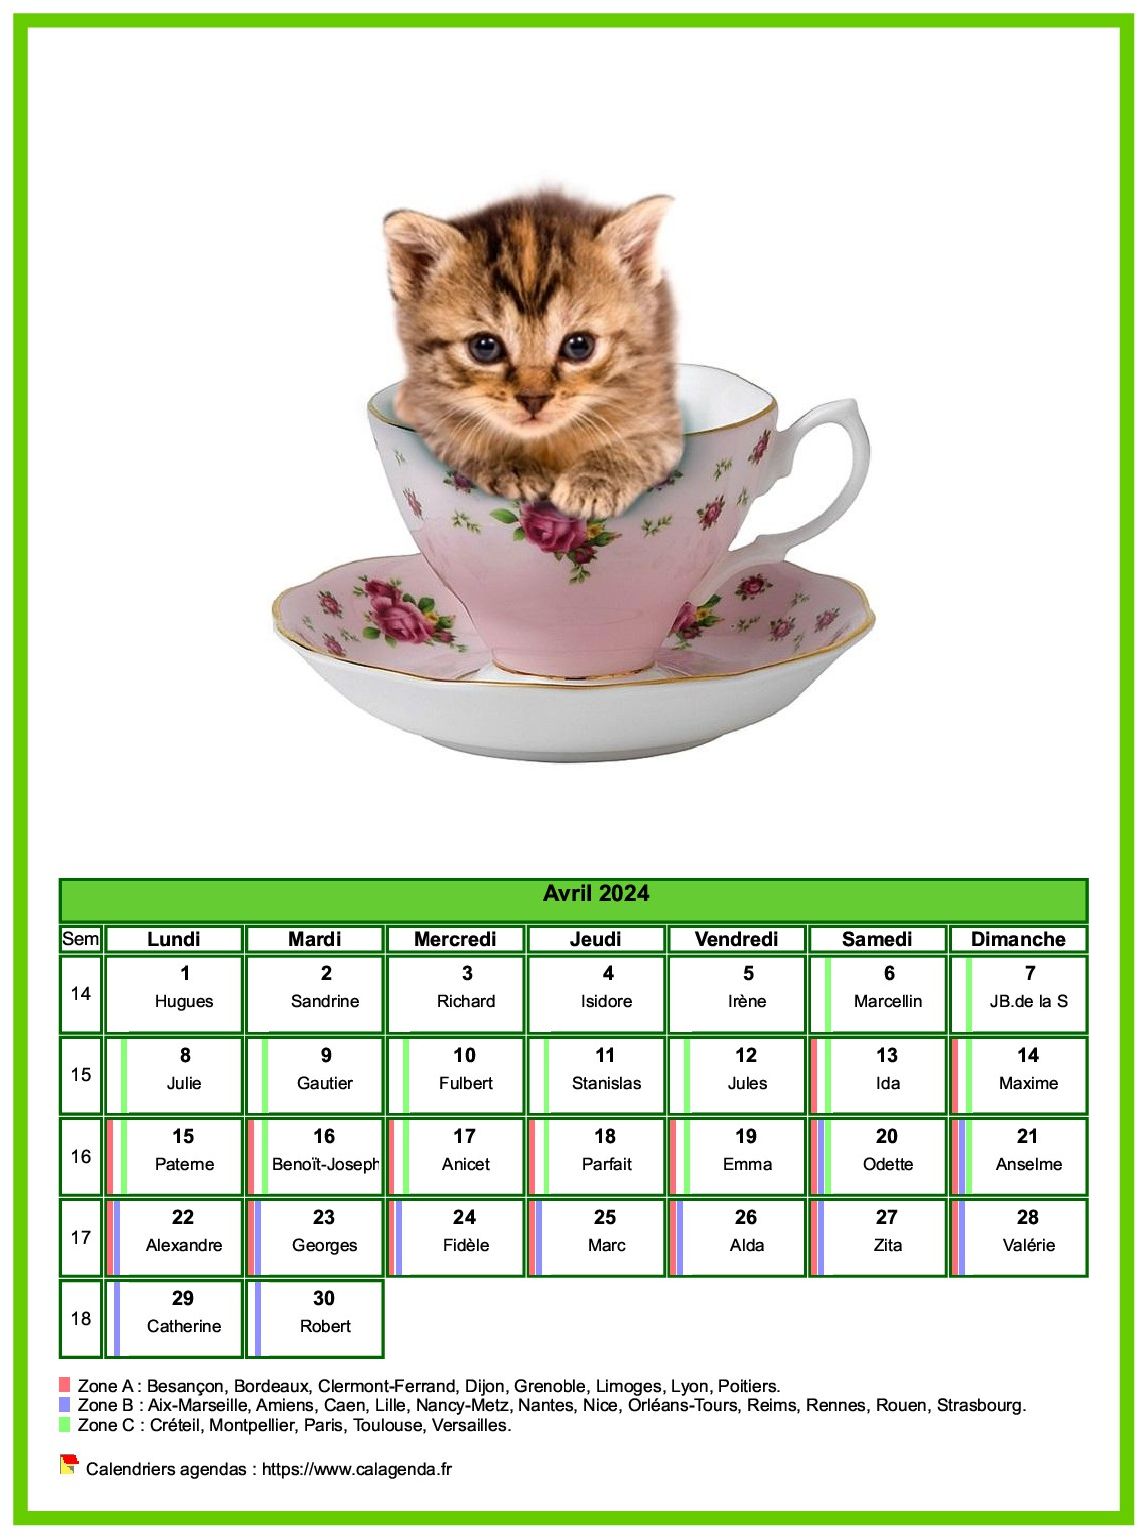 Calendrier avril 2024 chats